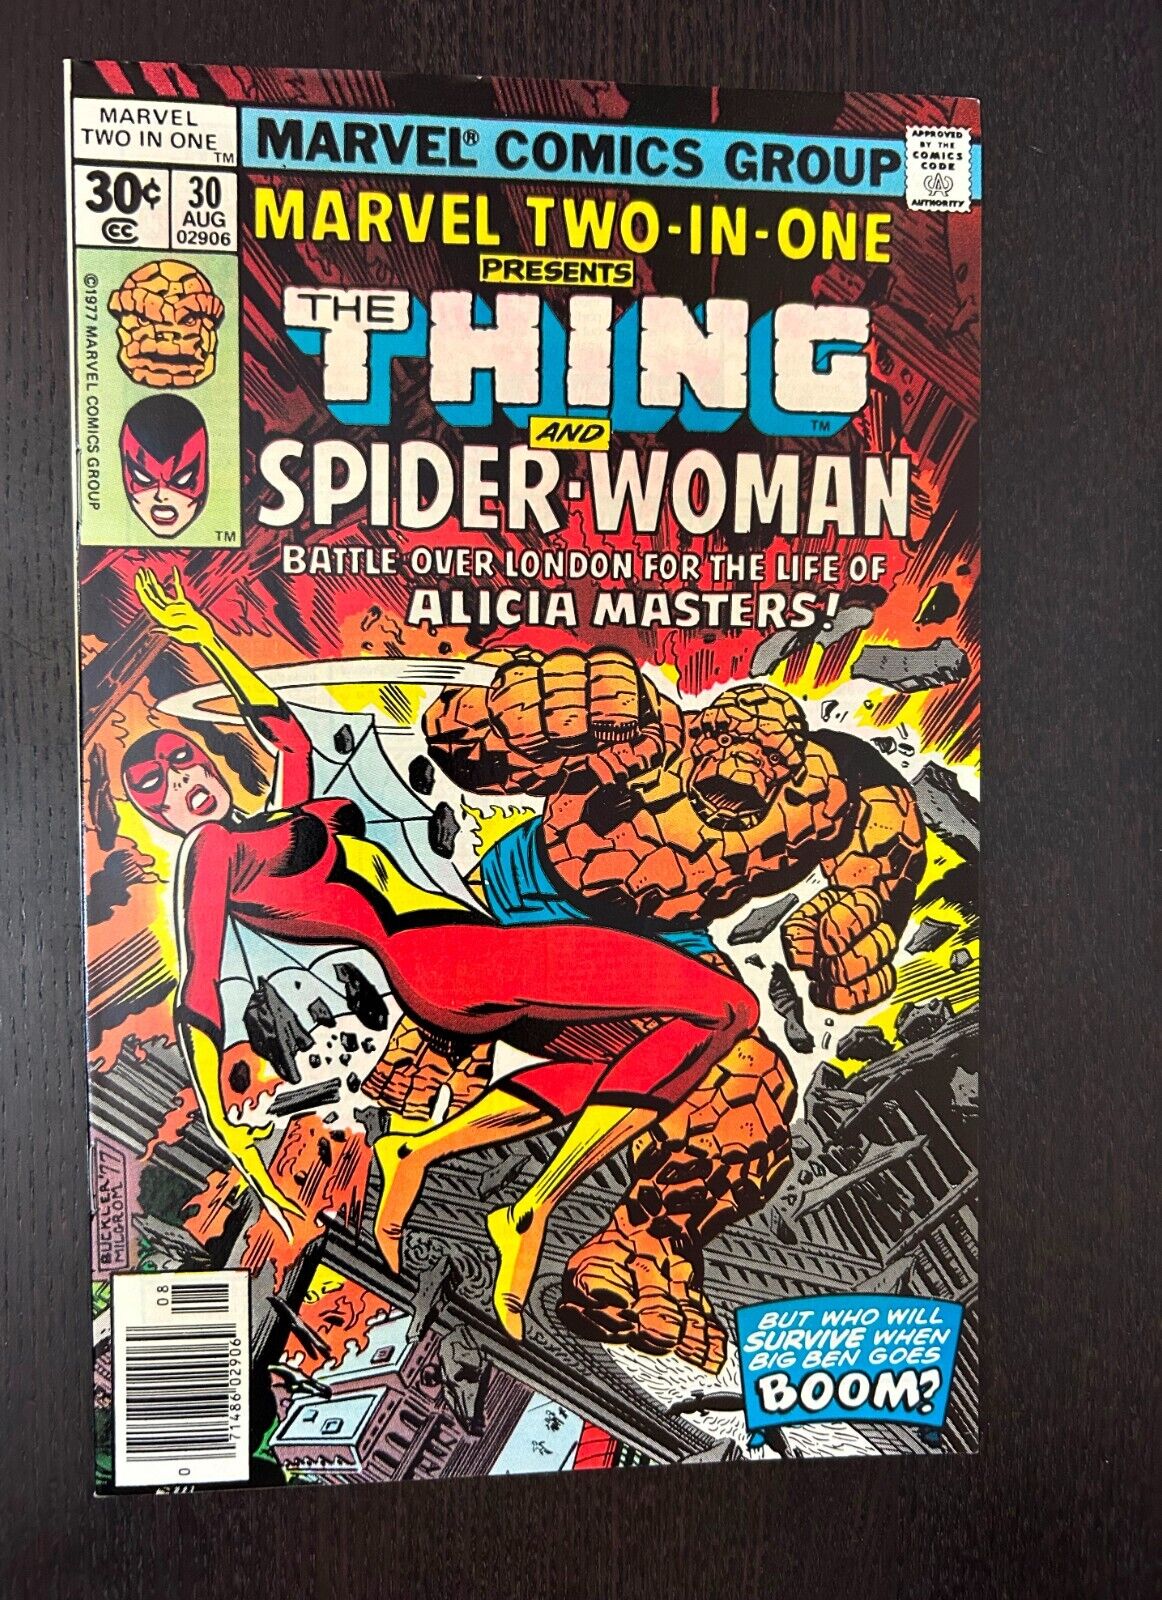 MARVEL TWO IN ONE #30 (Marvel Comics 1977) -- Bronze Age SPIDER WOMAN -- NM-